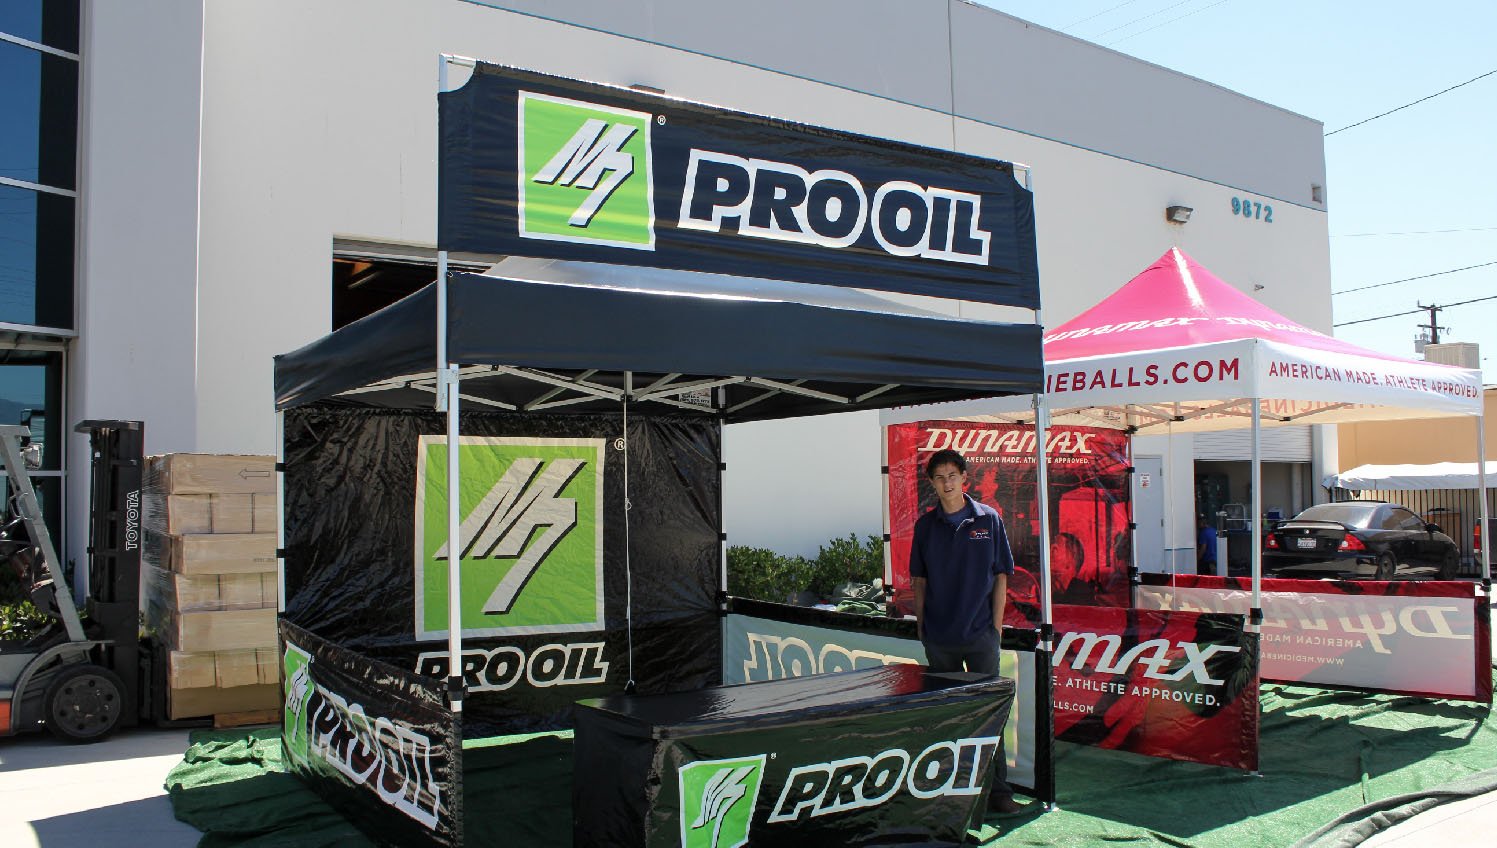 10x10 canopy with a pop up tent banner for Pro Oil